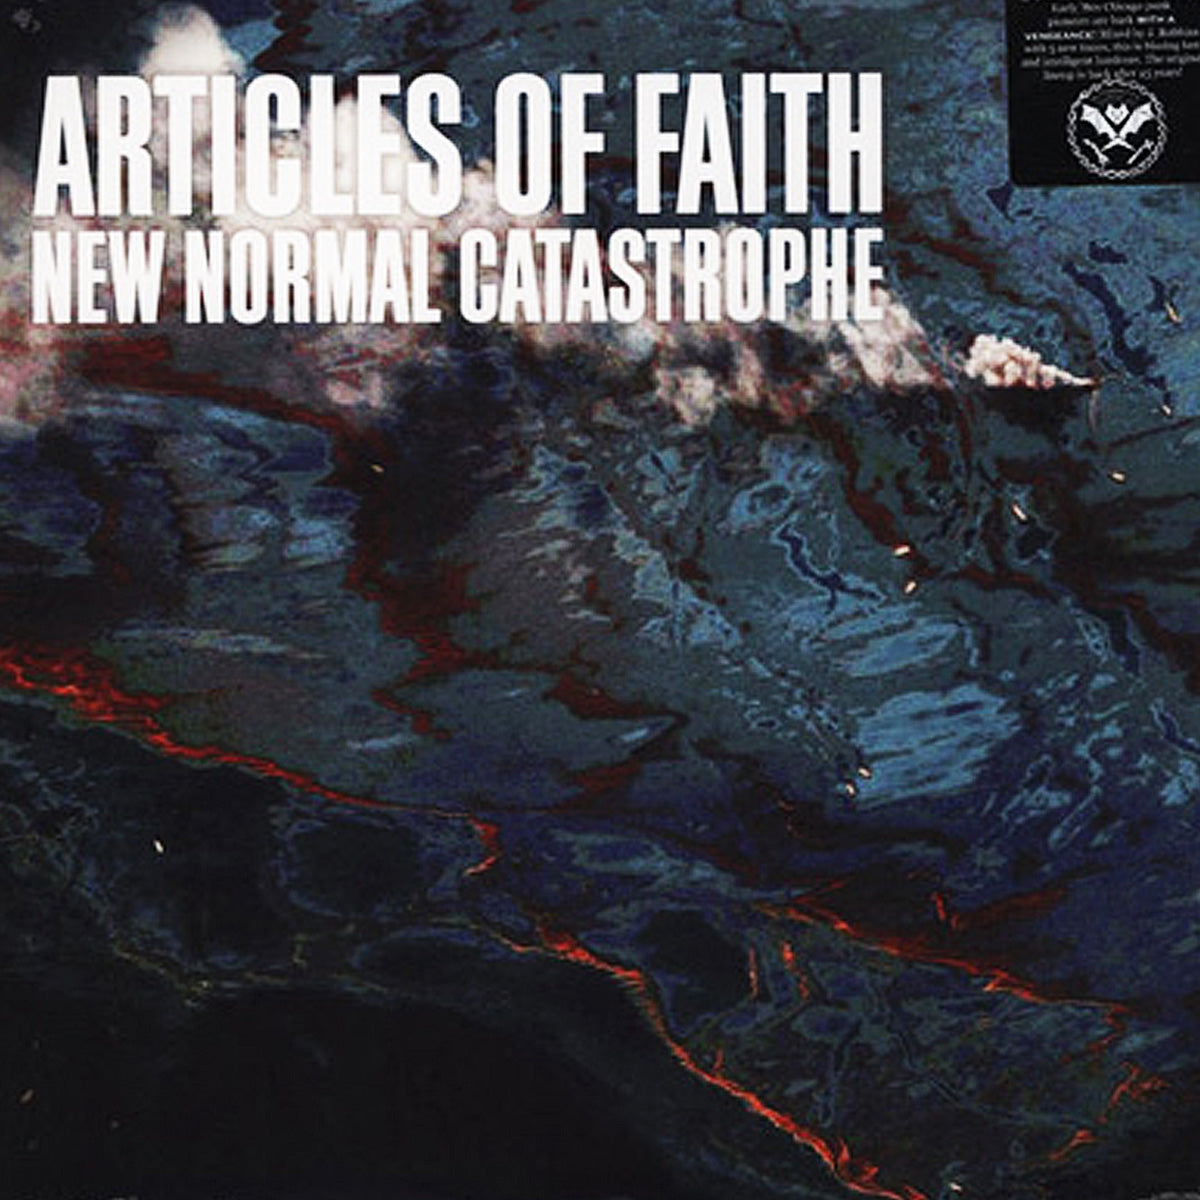 v422 - Articles Of Faith - "New Normal Catastrophe"